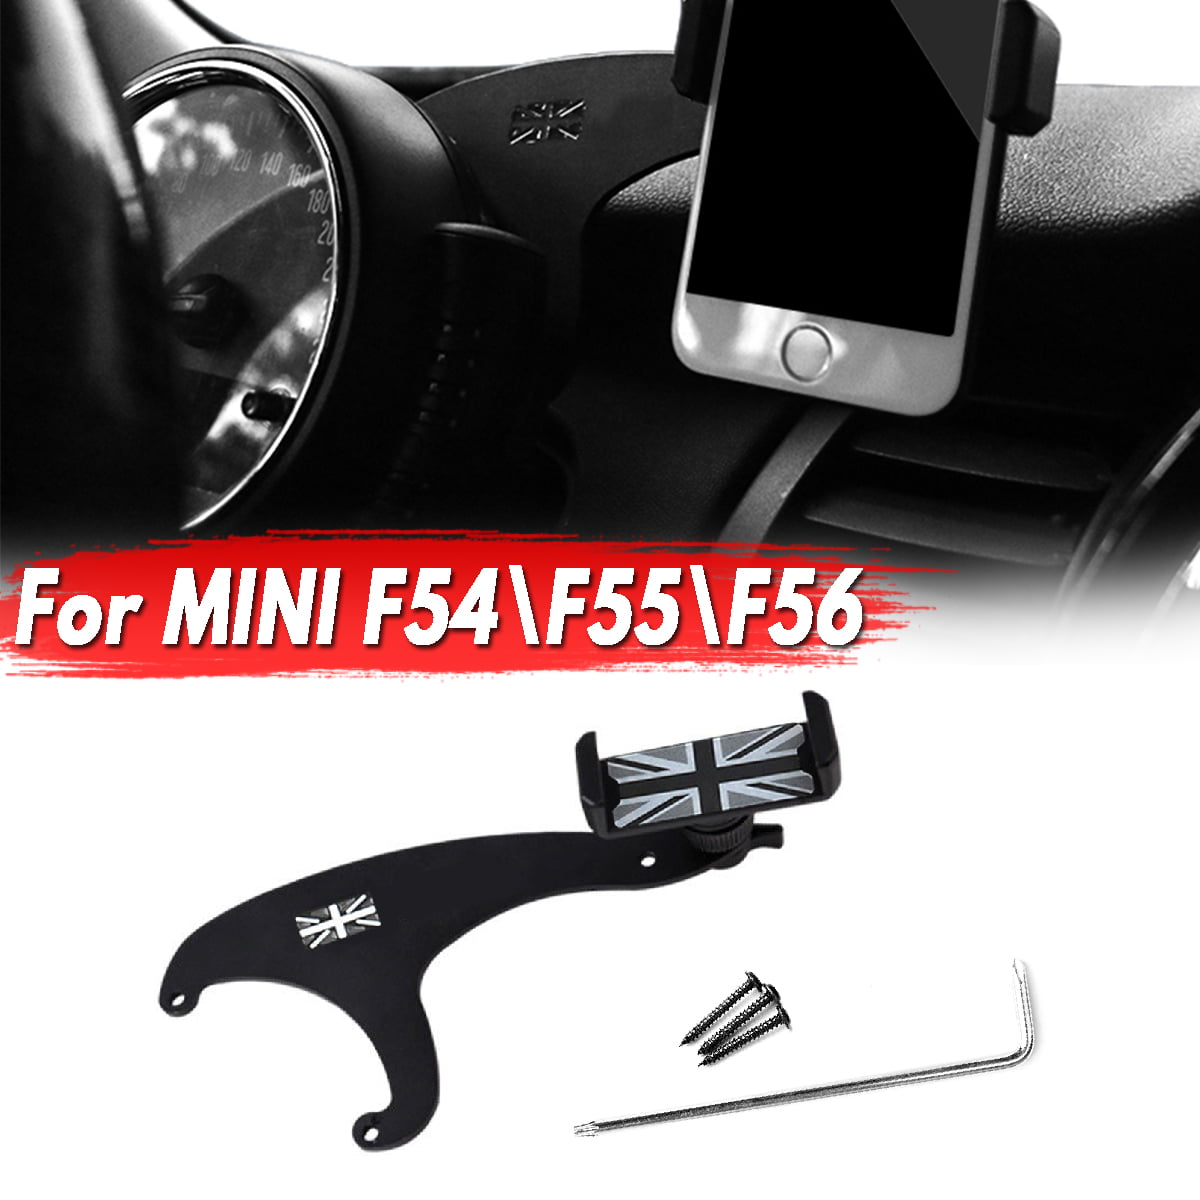 Car Mobile Phone Mount Cradle Holder Stand For Mini Cooper Clubman R55 R56 R57